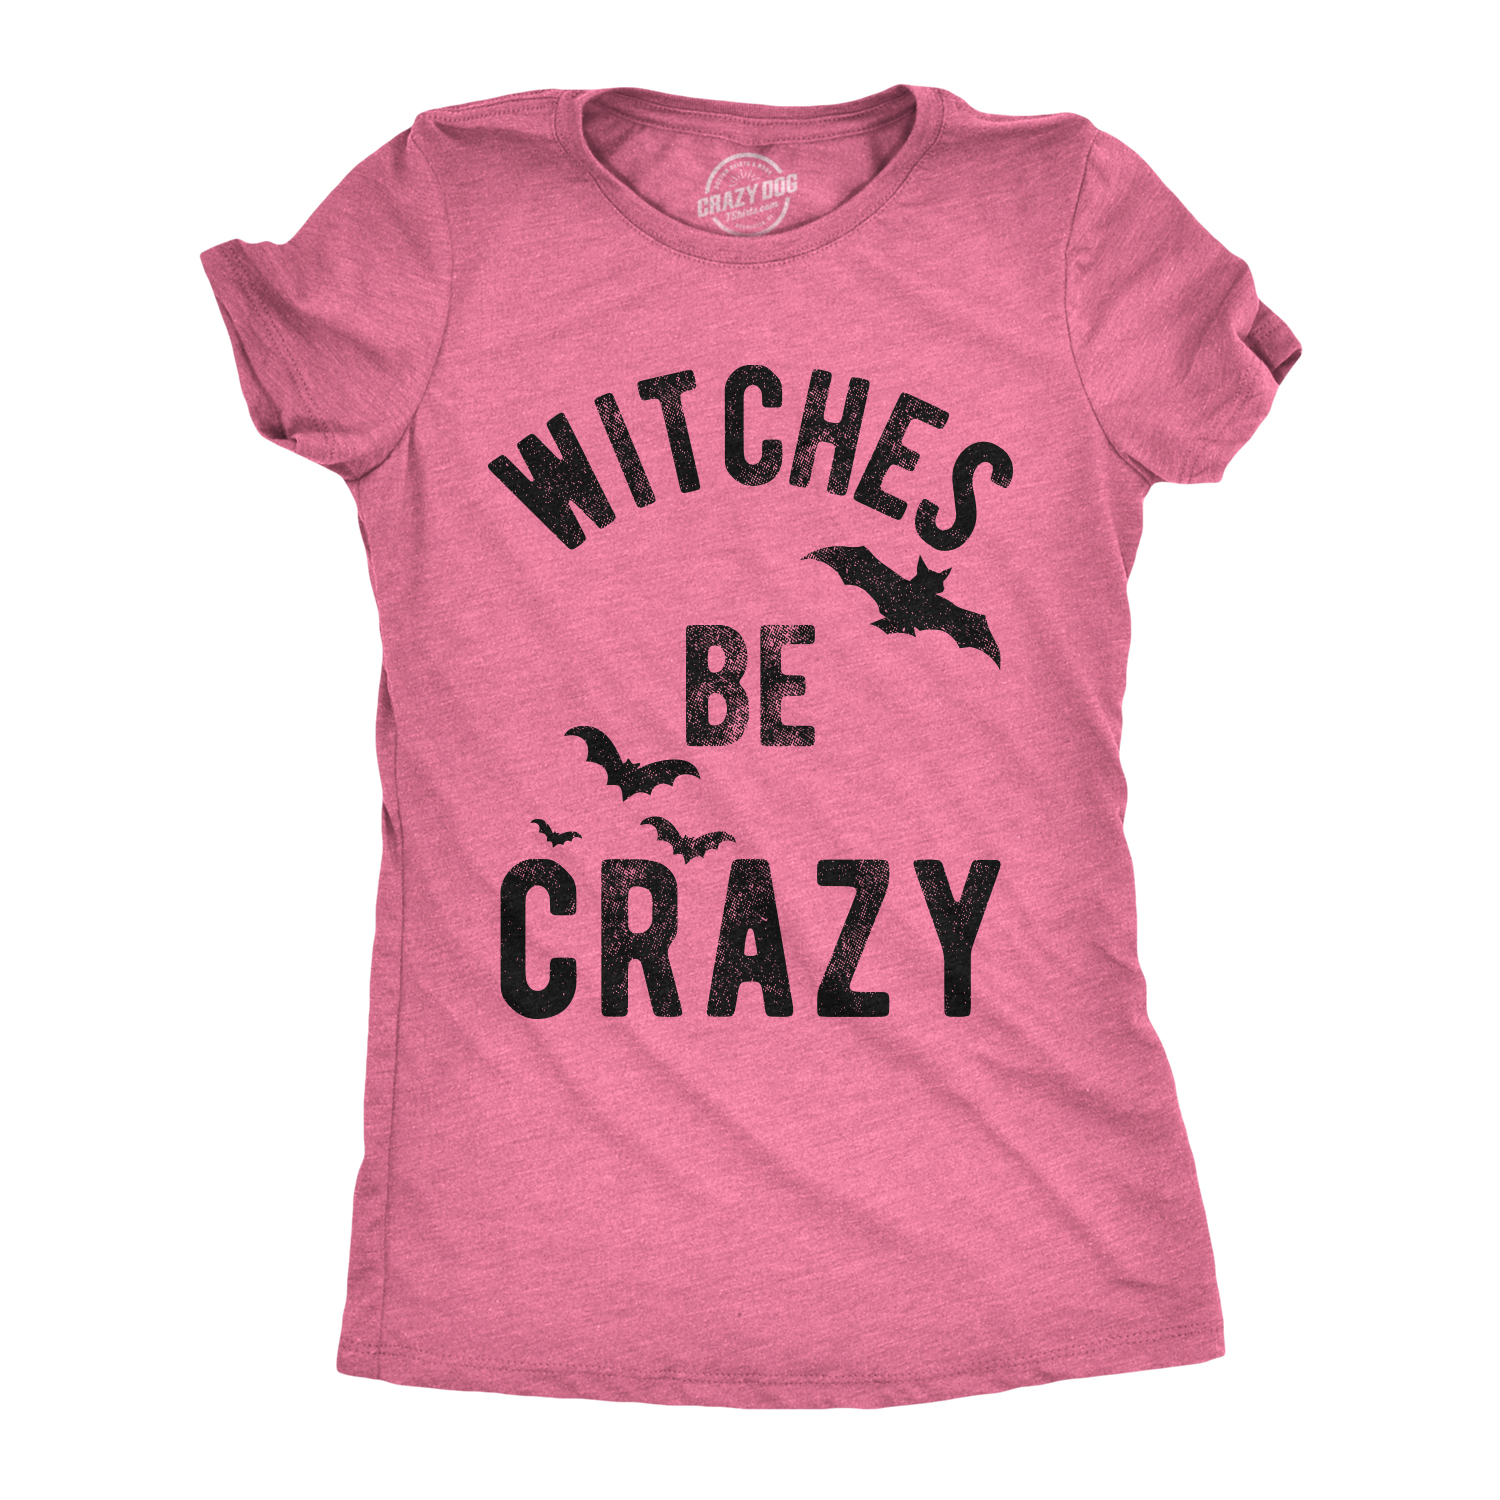 Womens Witches Be Crazy Tshirt Funny Party Tee For Ladies Womens Graphic Tees - image 1 of 9